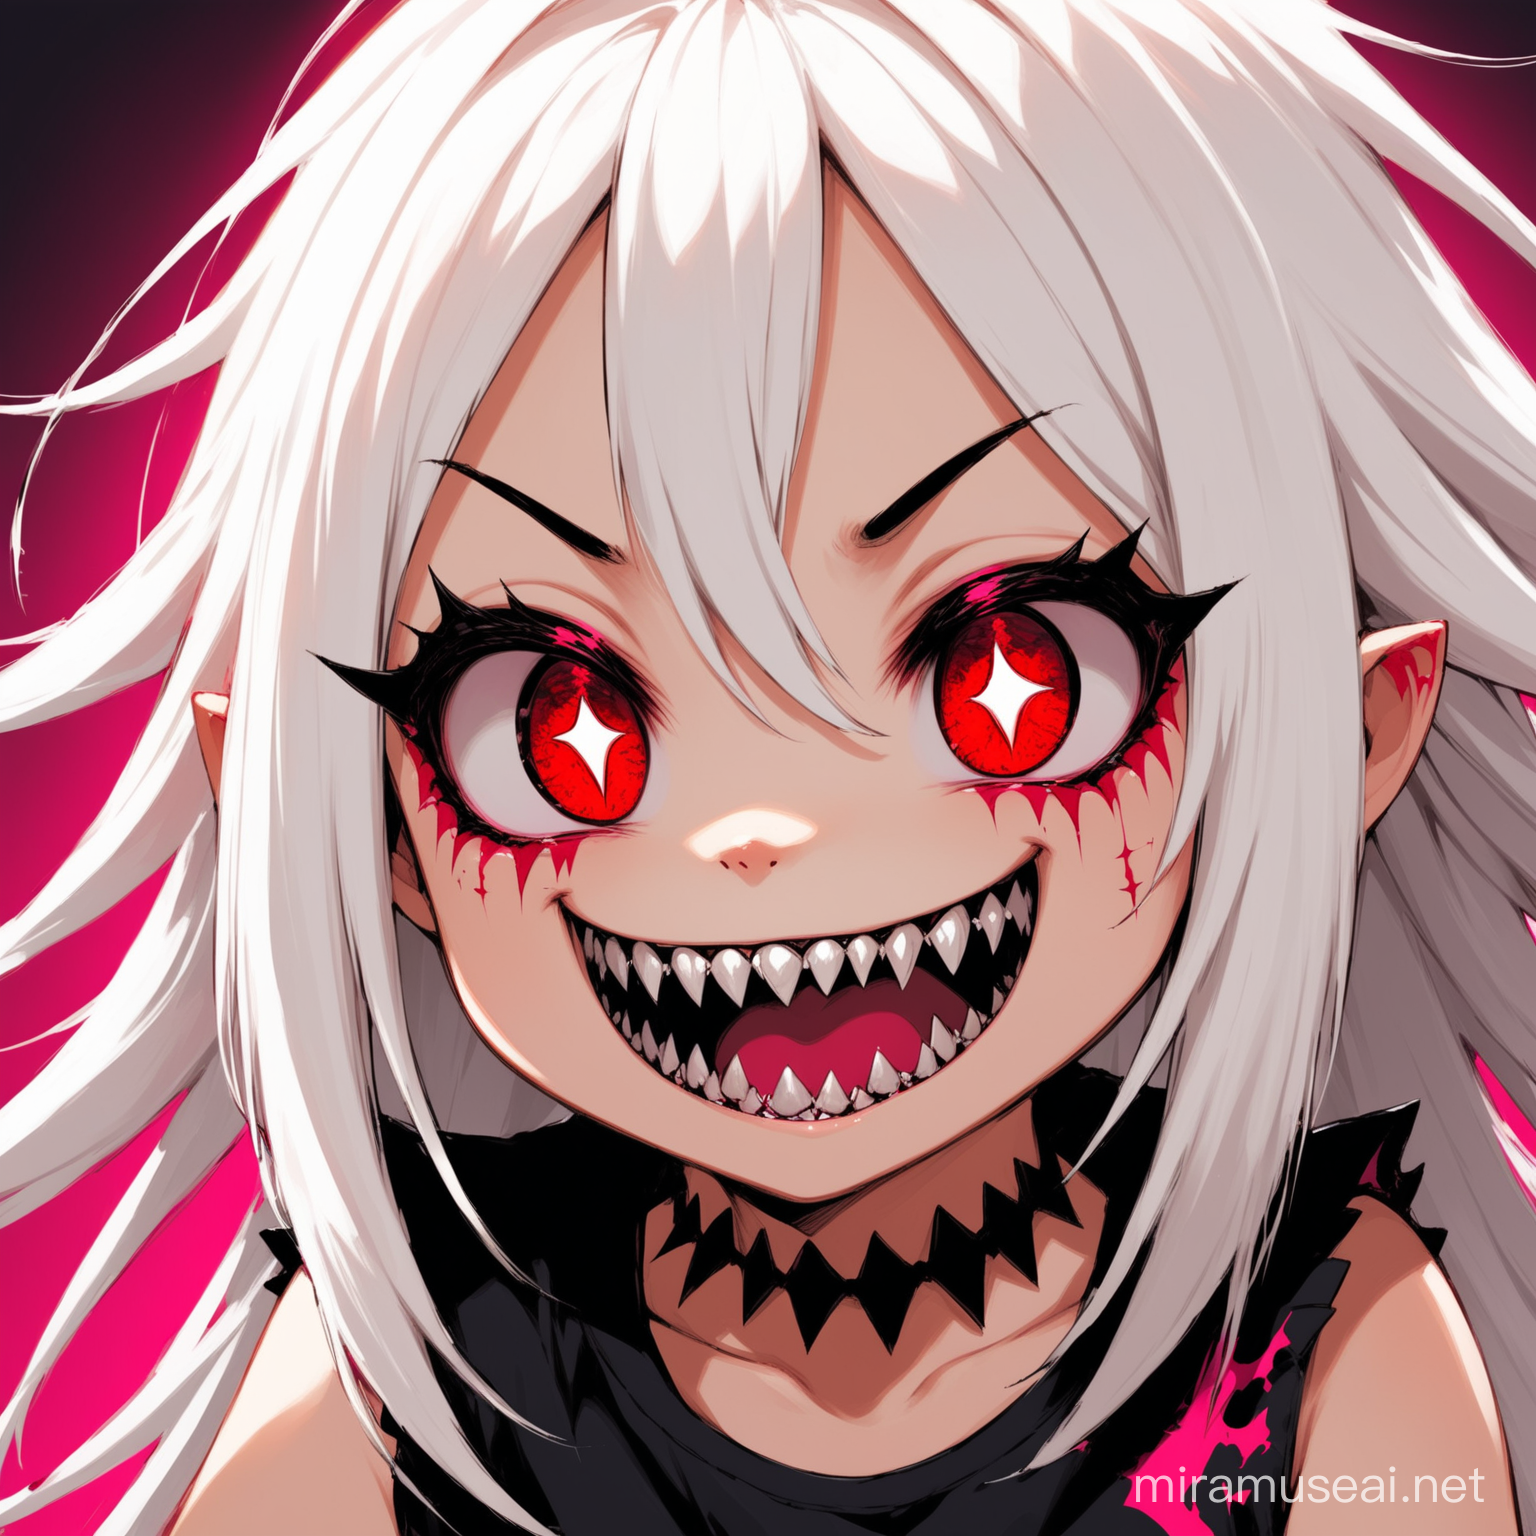 Cute and insane little girl character with long white hair, vibrant psychotic red eyes and a crazy smile filled with razor sharp teeth. 